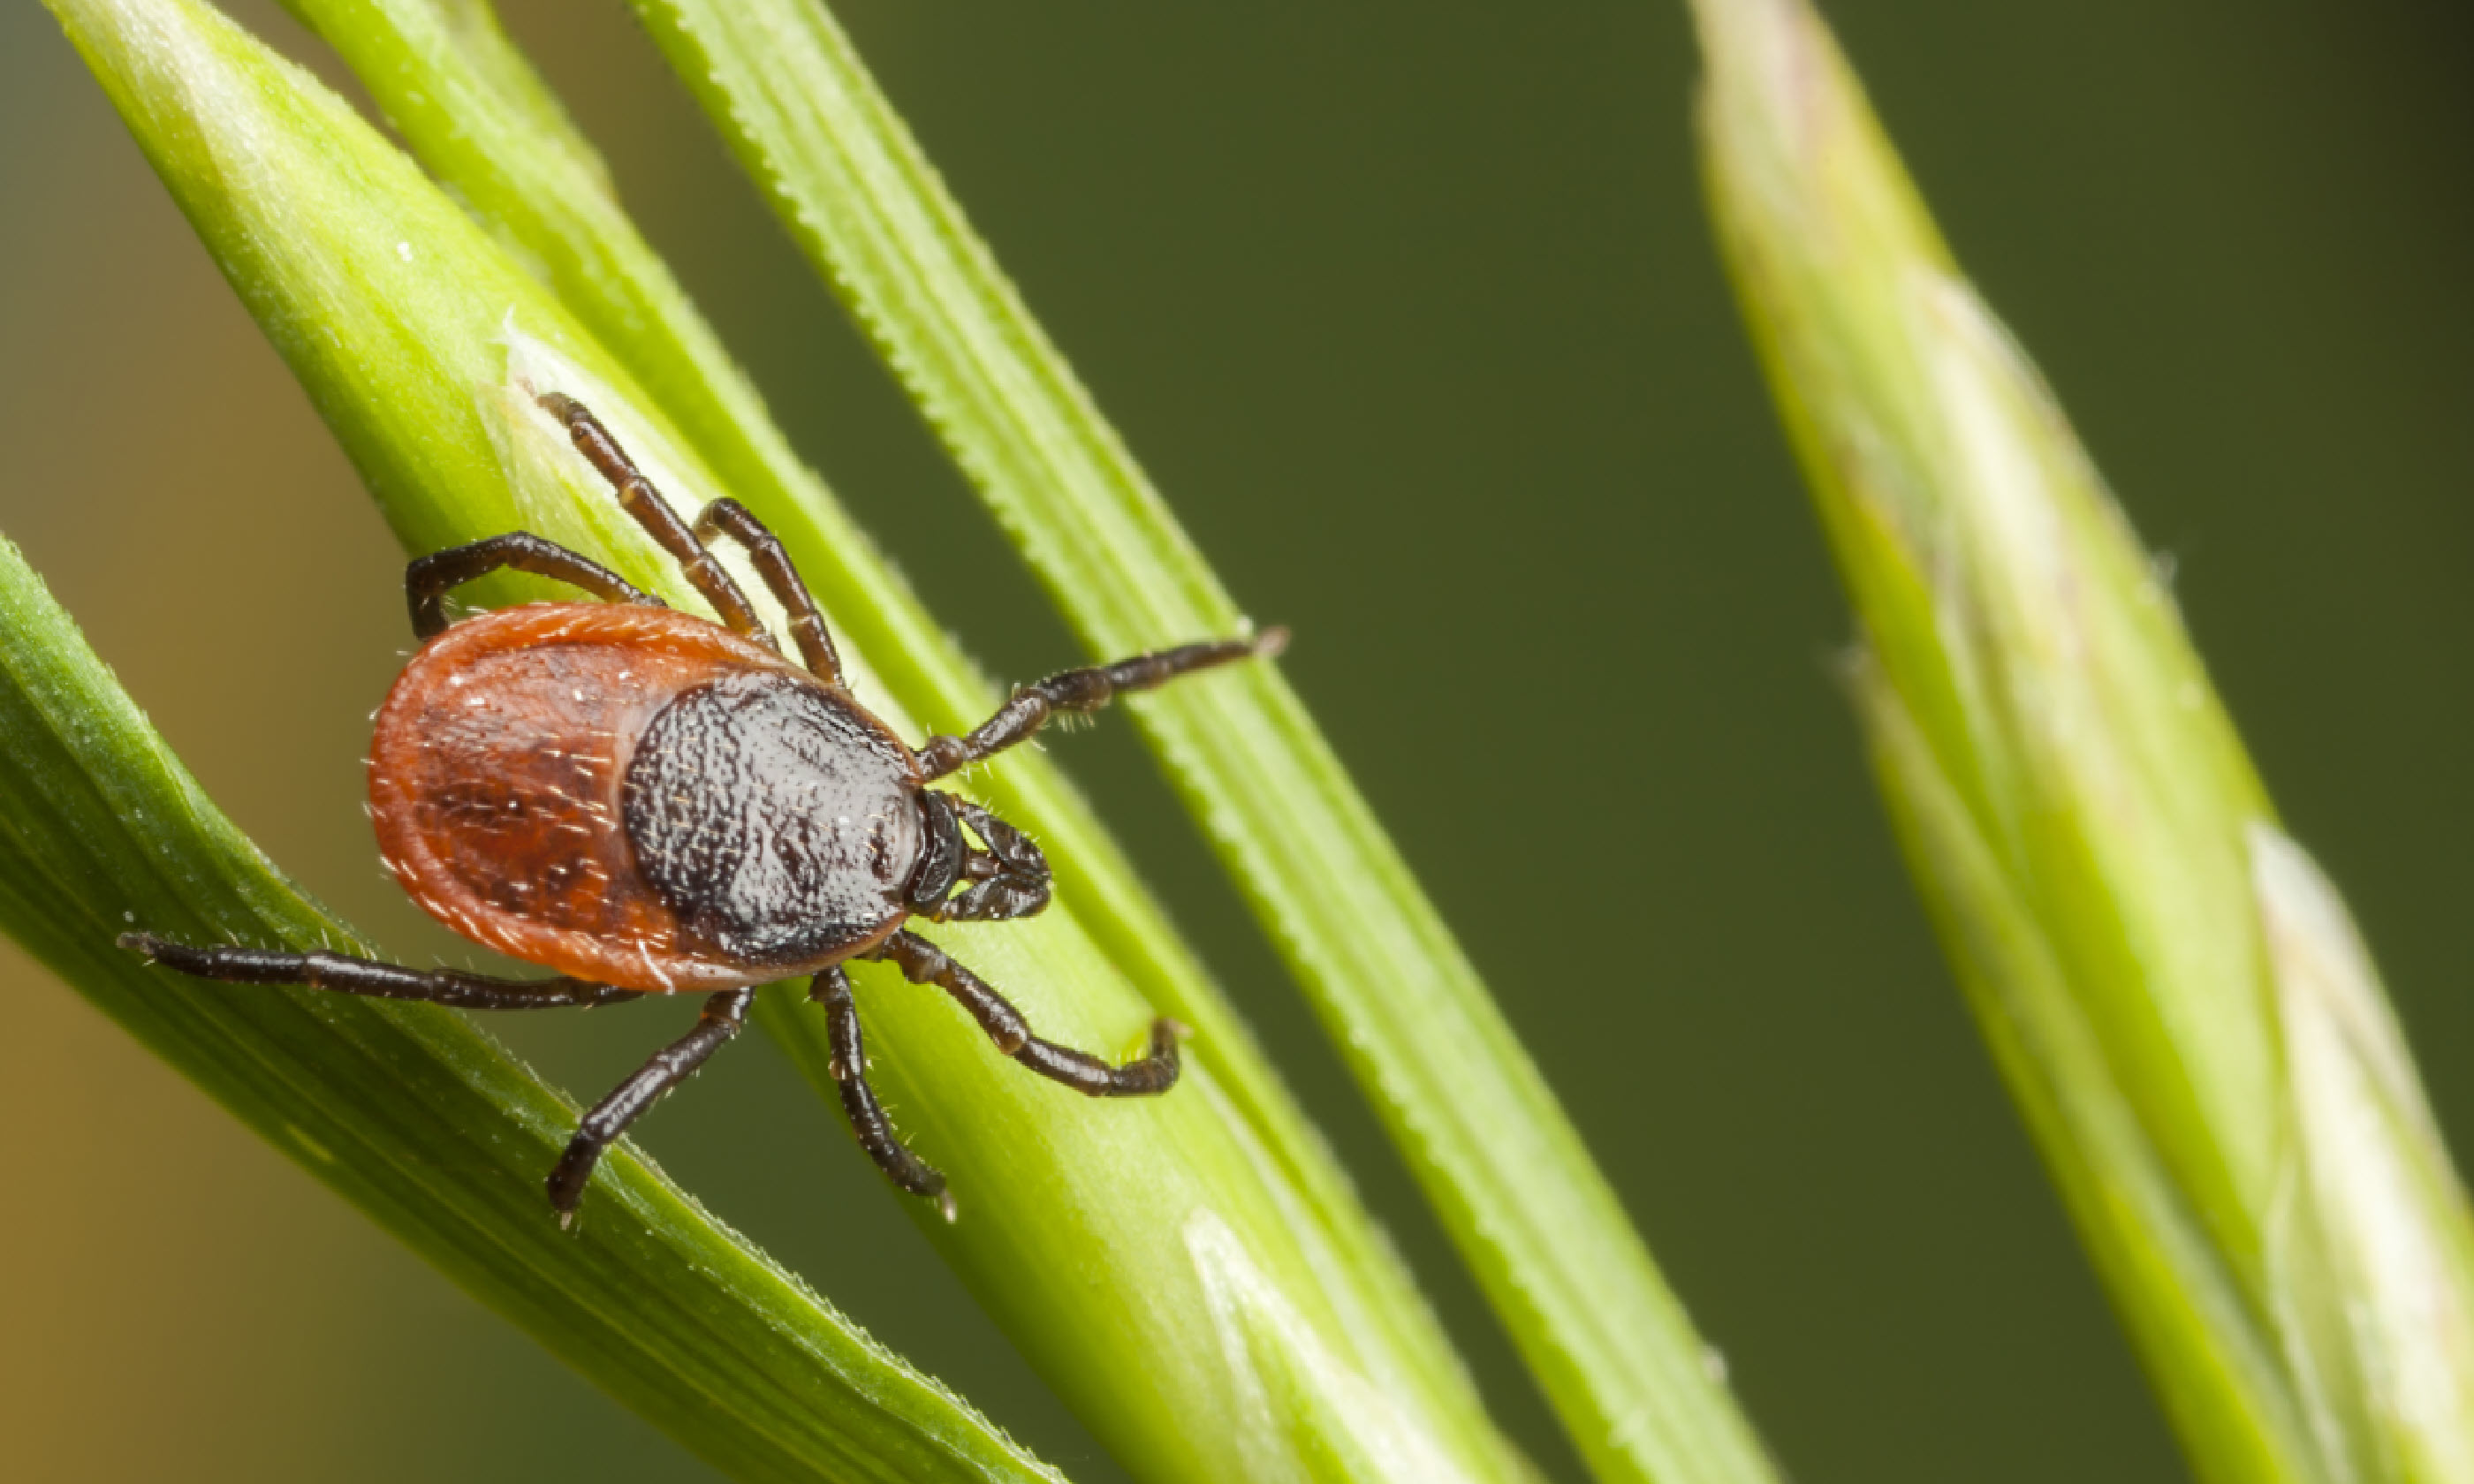 A tick on a plant straw (Shutterstock)